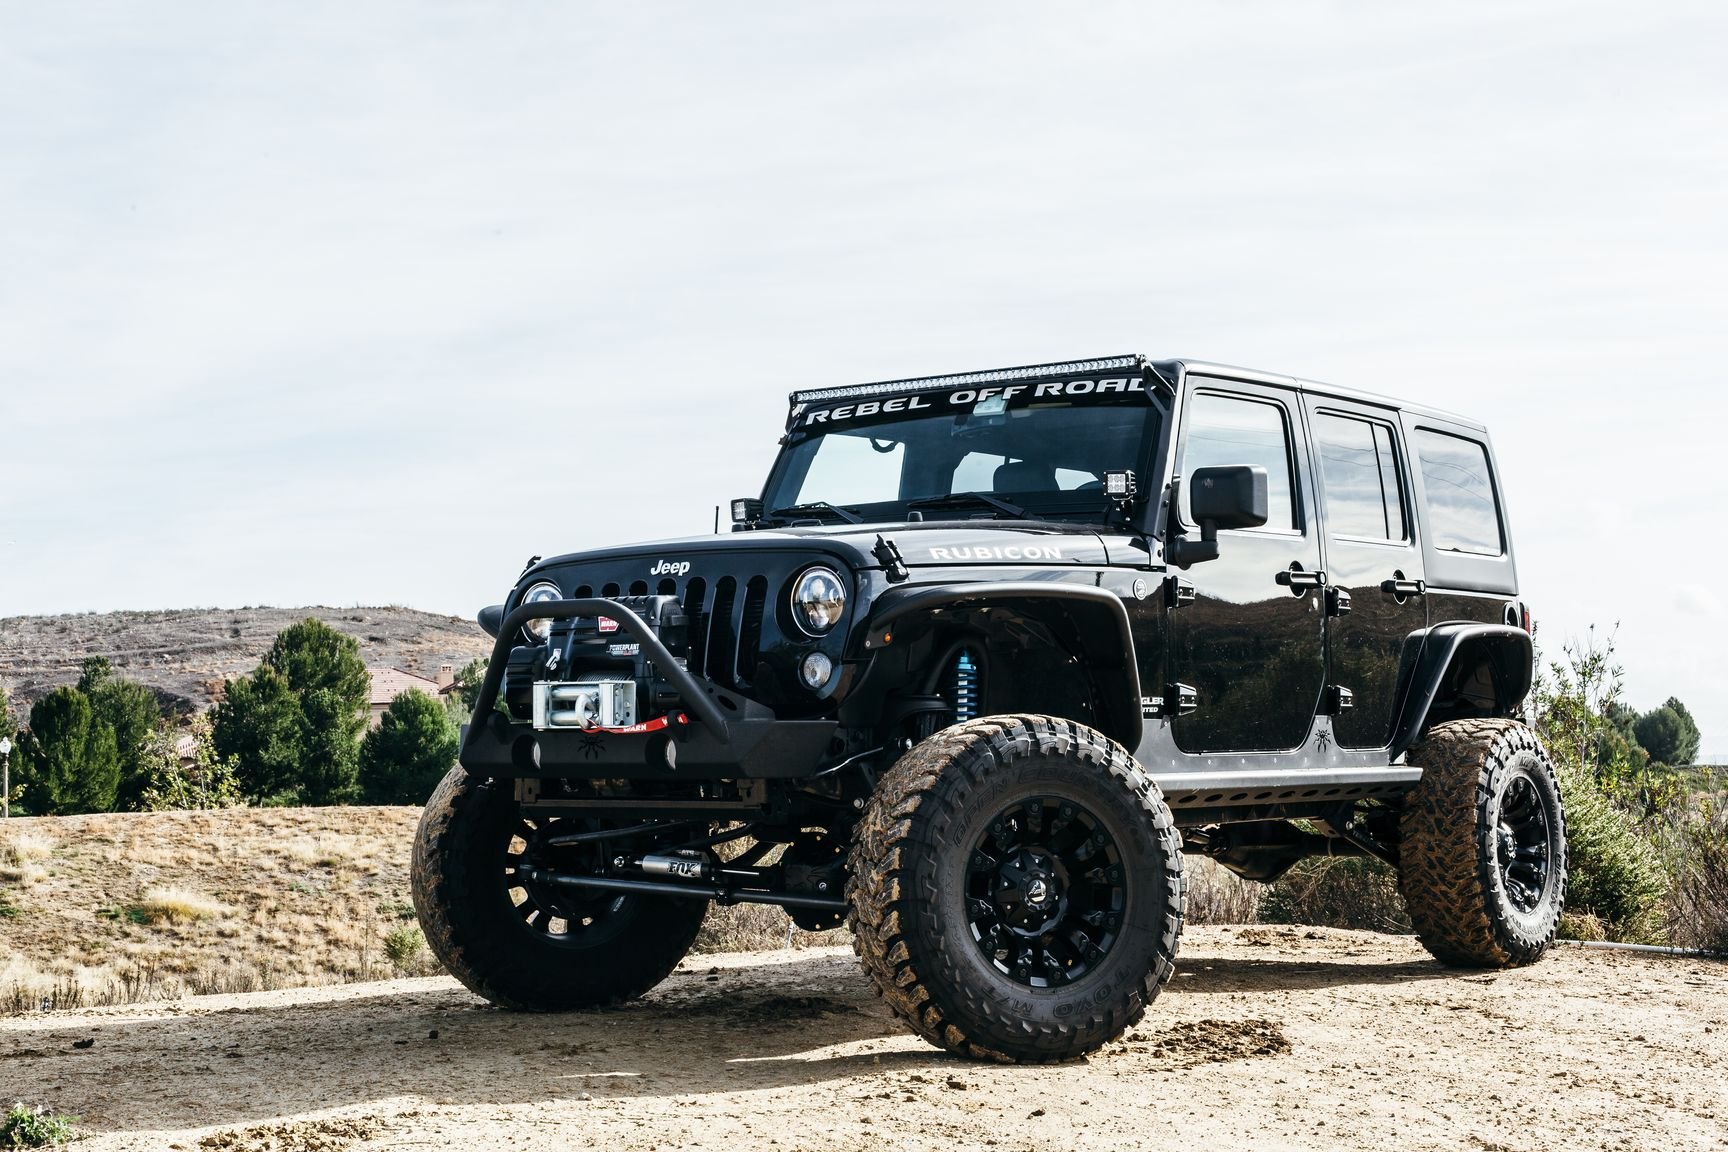 Toyo Open Country Tires on Custom Black Jeep Wrangler Rubicon - Photo by Rebel Off-Road